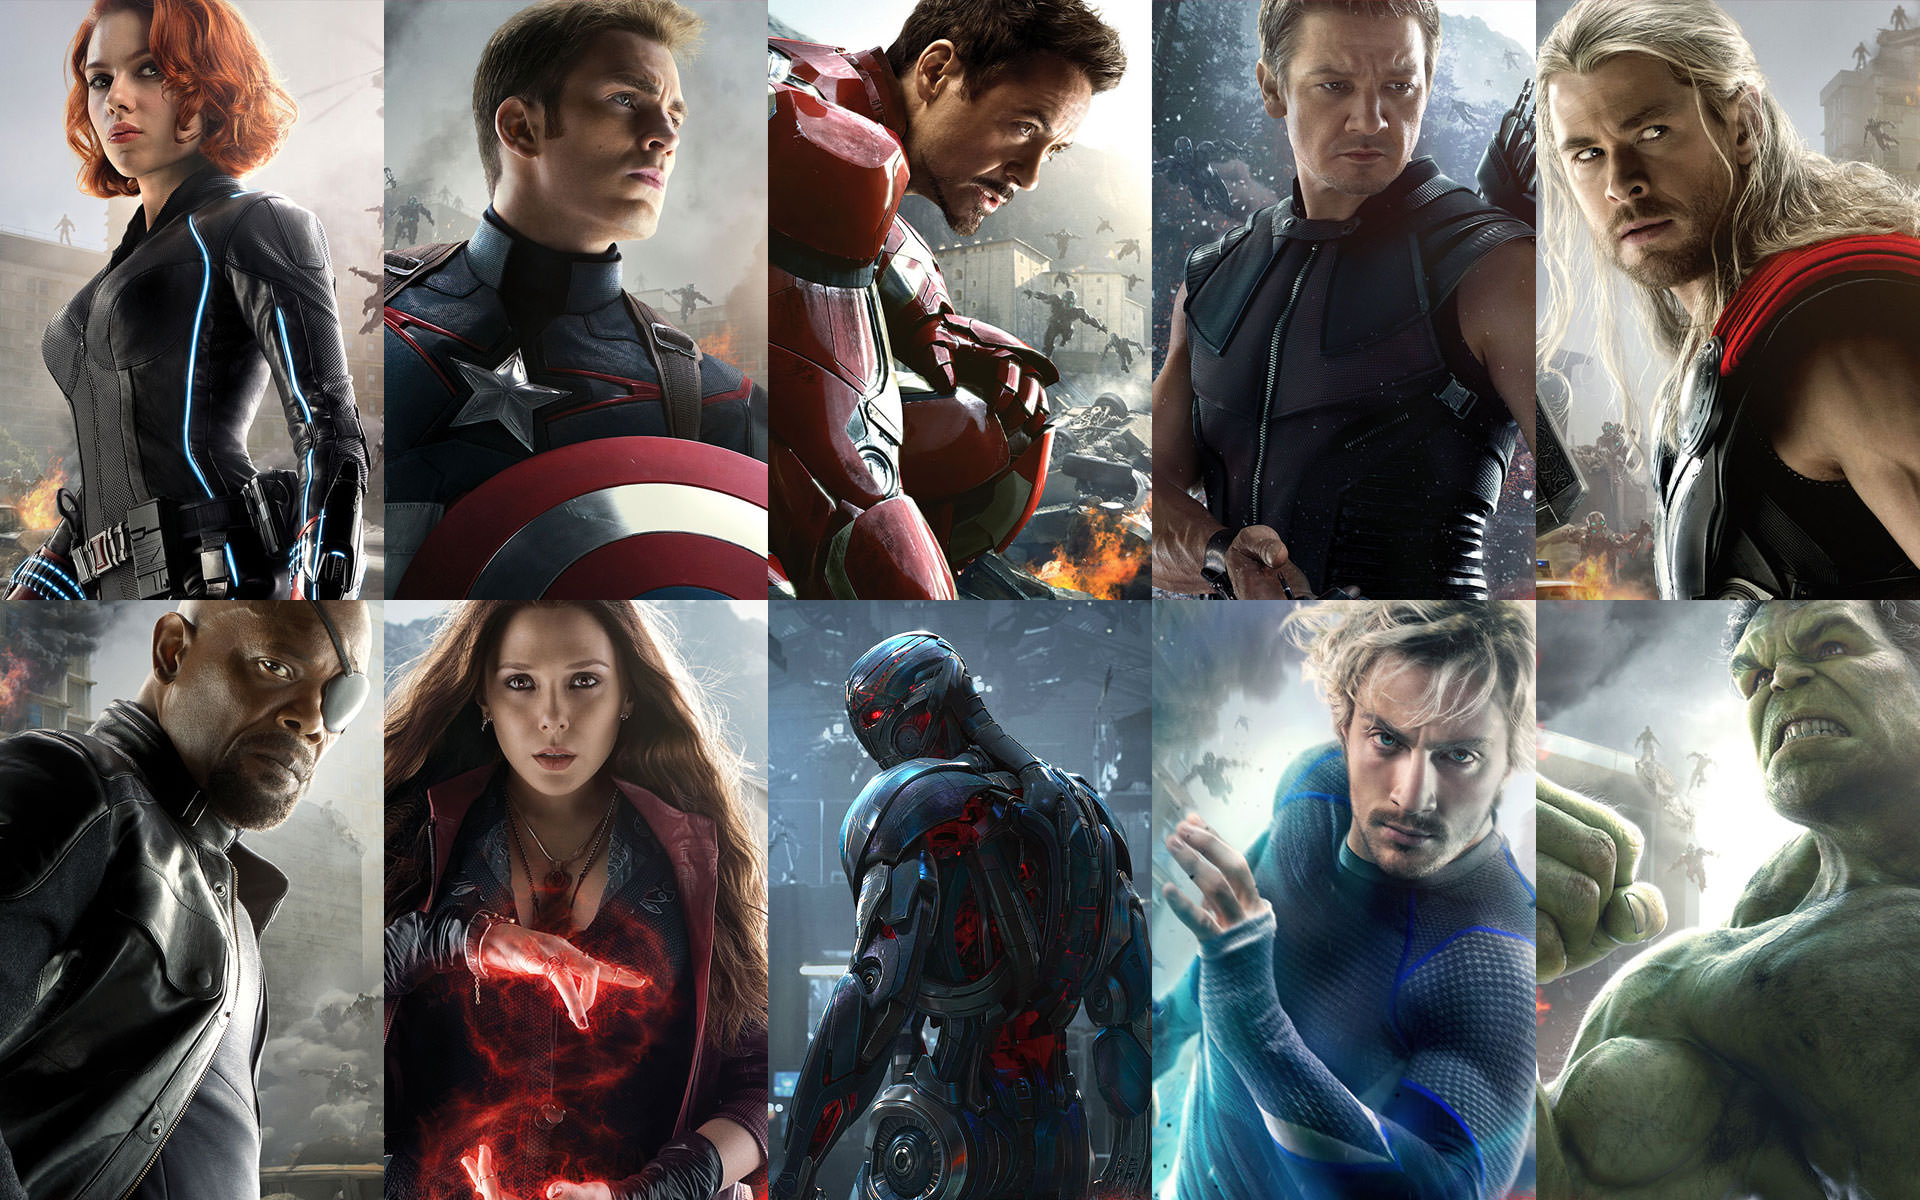 Avengers-2-Age-of-Ultron-Character-Posters-Collage